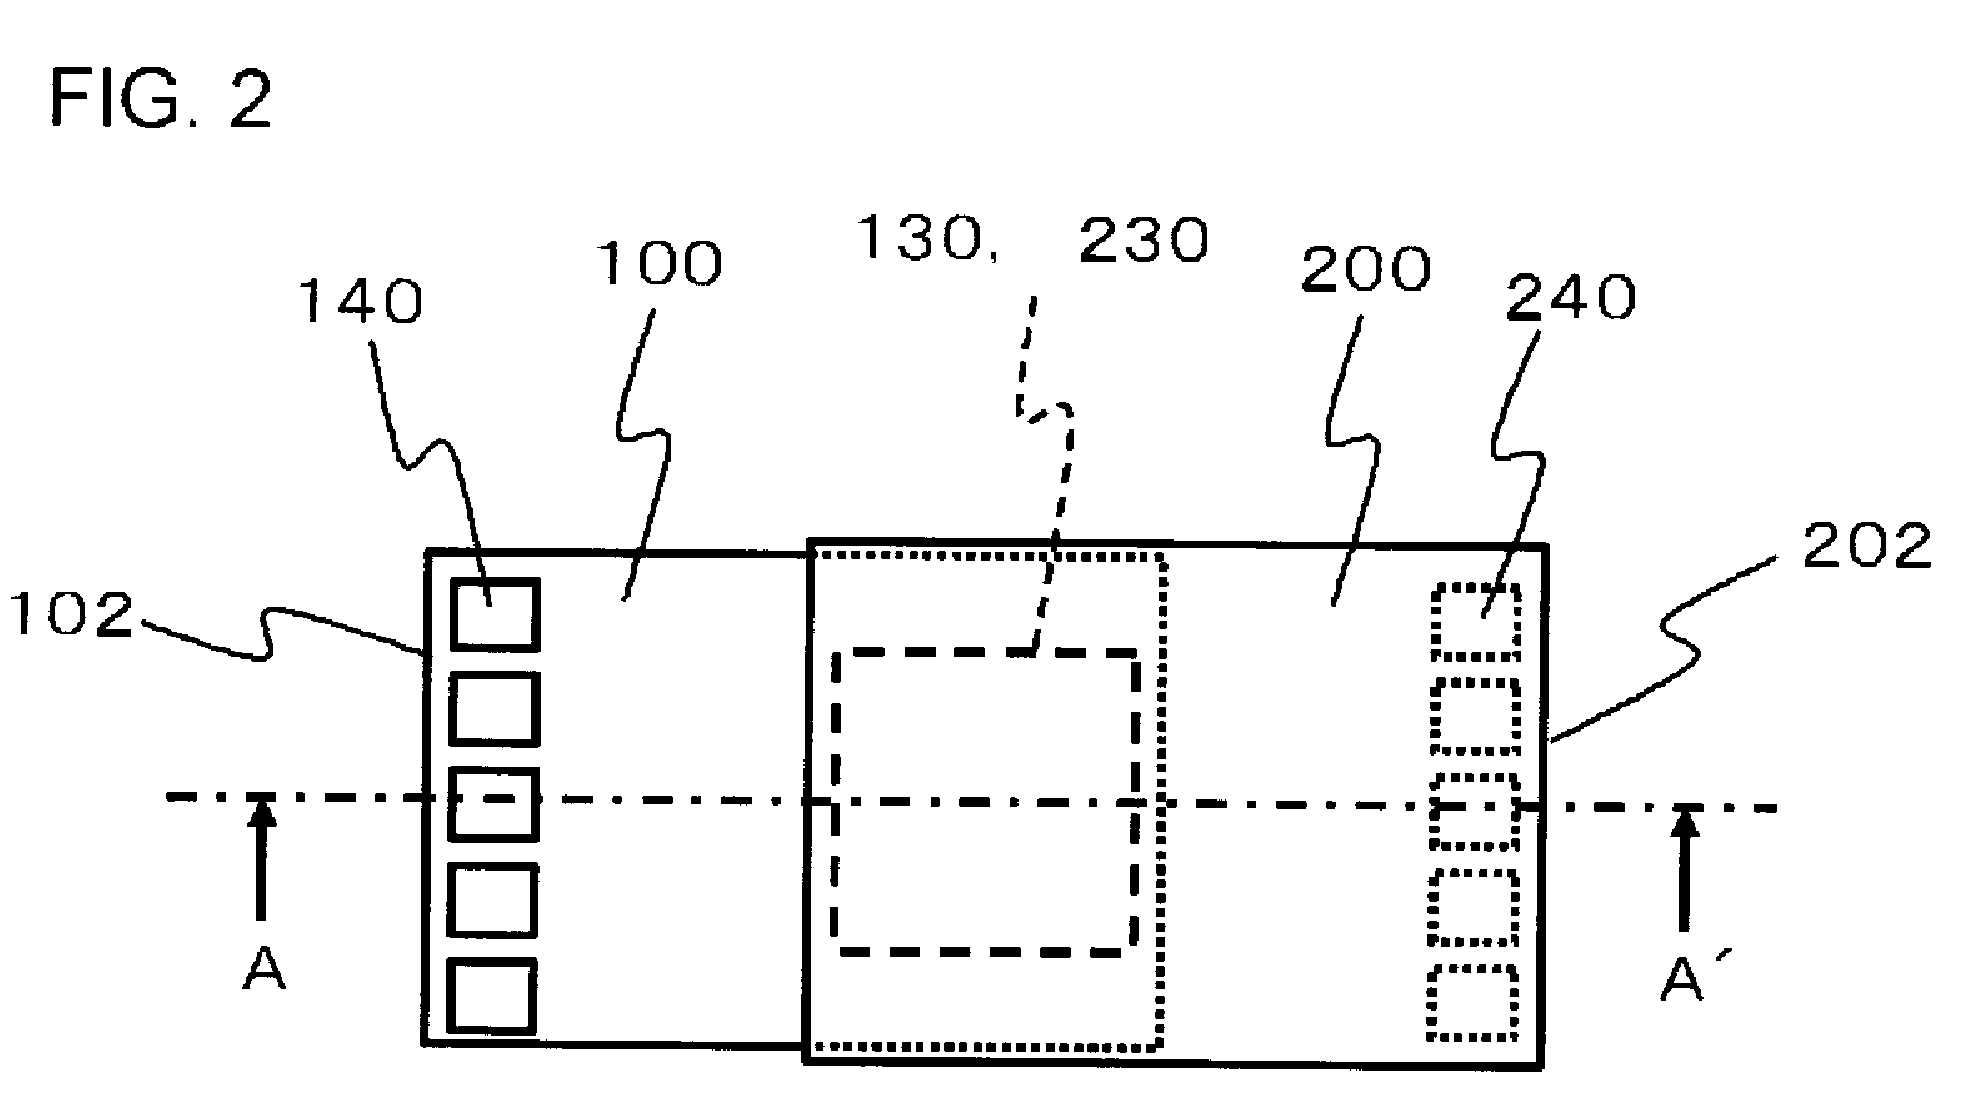 Semiconductor device that performs signal transmission using induction coupling, method of said manufacturing semiconductor device, and lead frame thereof